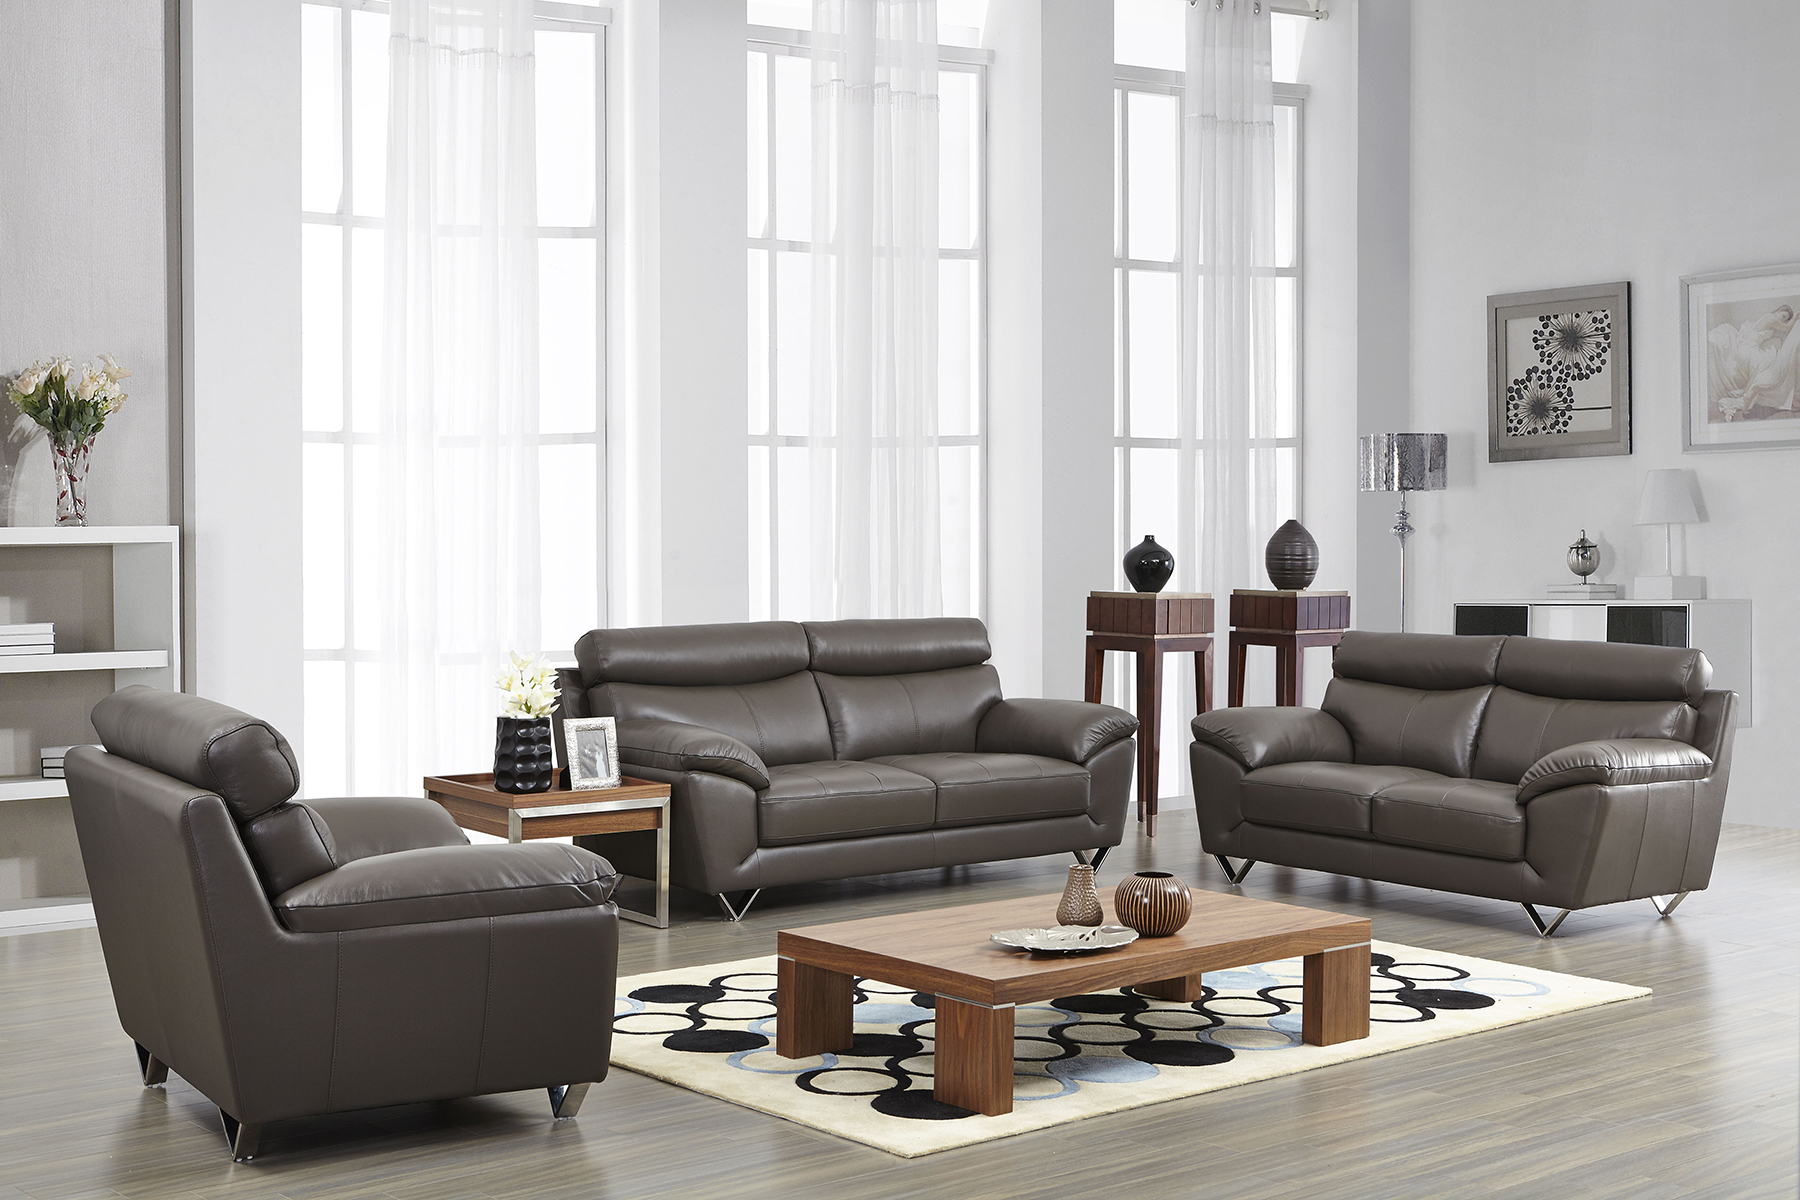 leather sofa with stainless steel legs